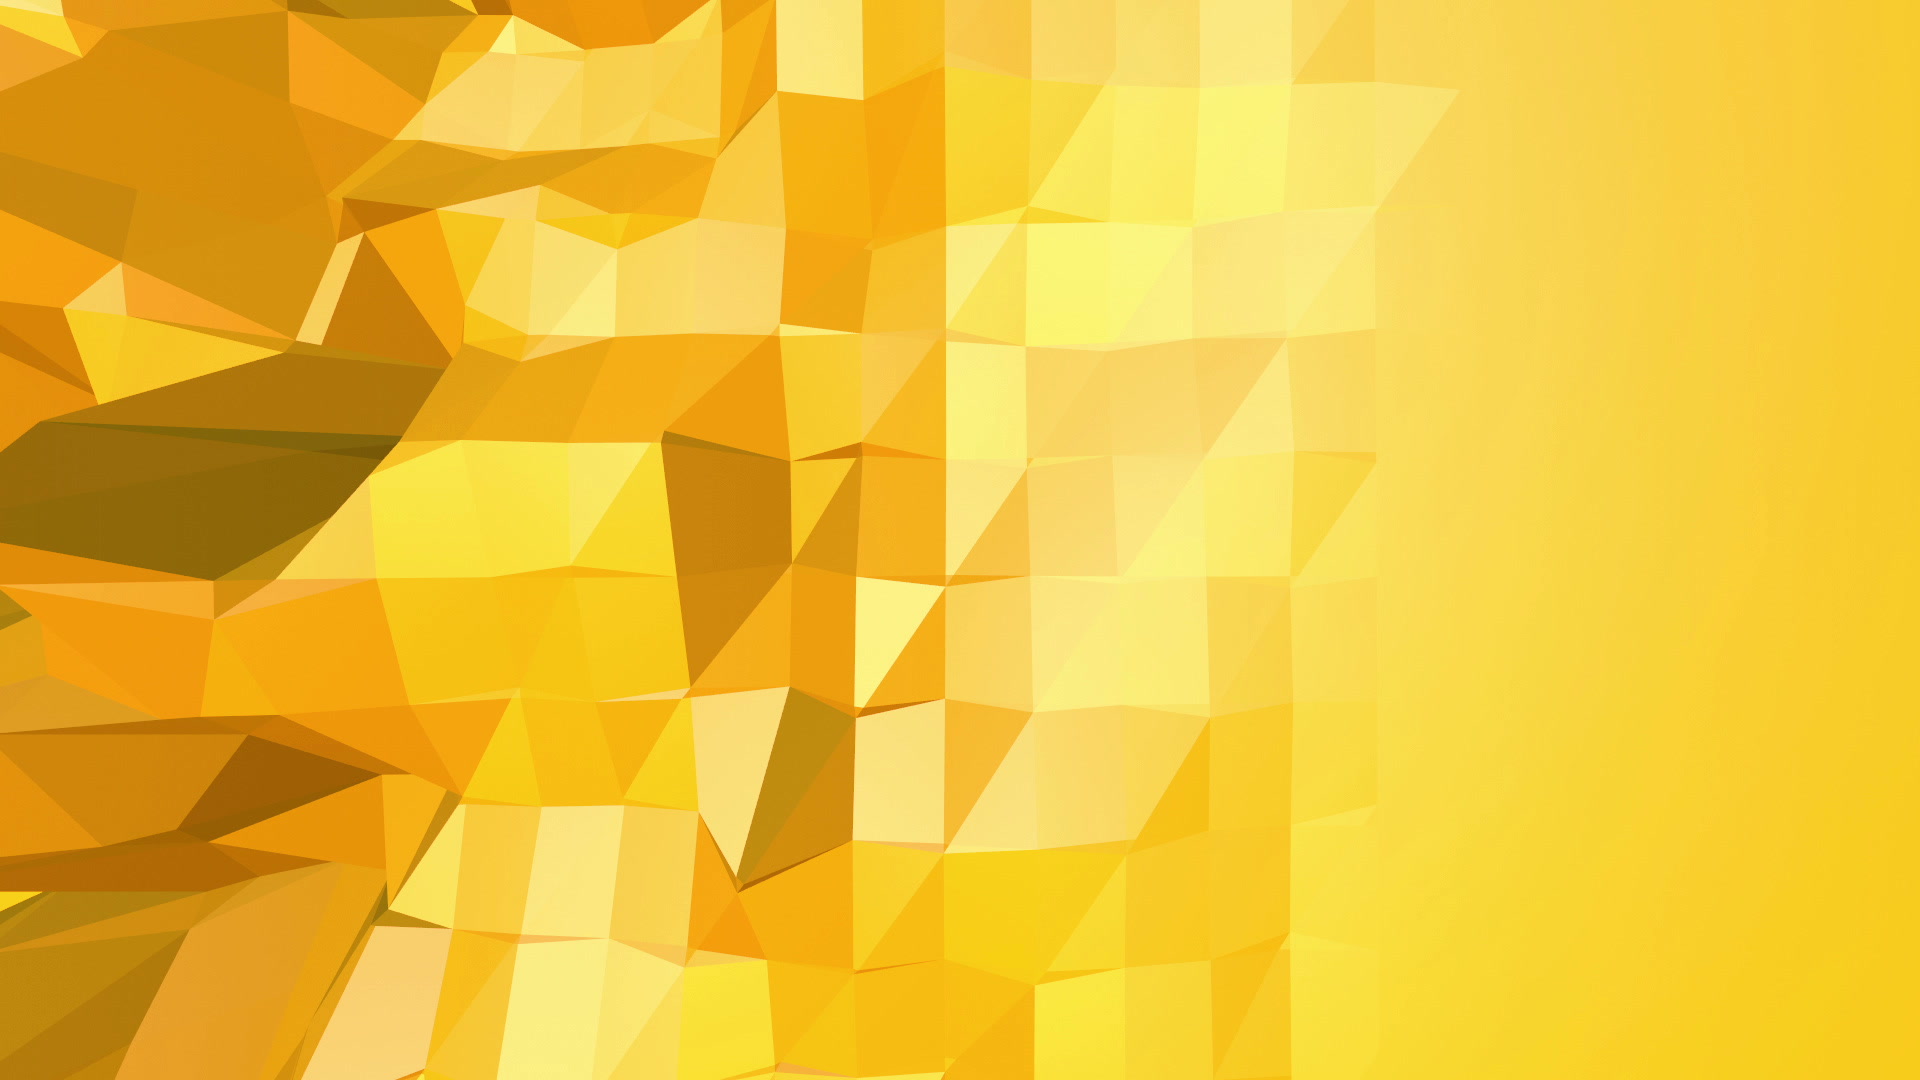 Video: Yellow low poly background pulsating. Abstract low poly ...